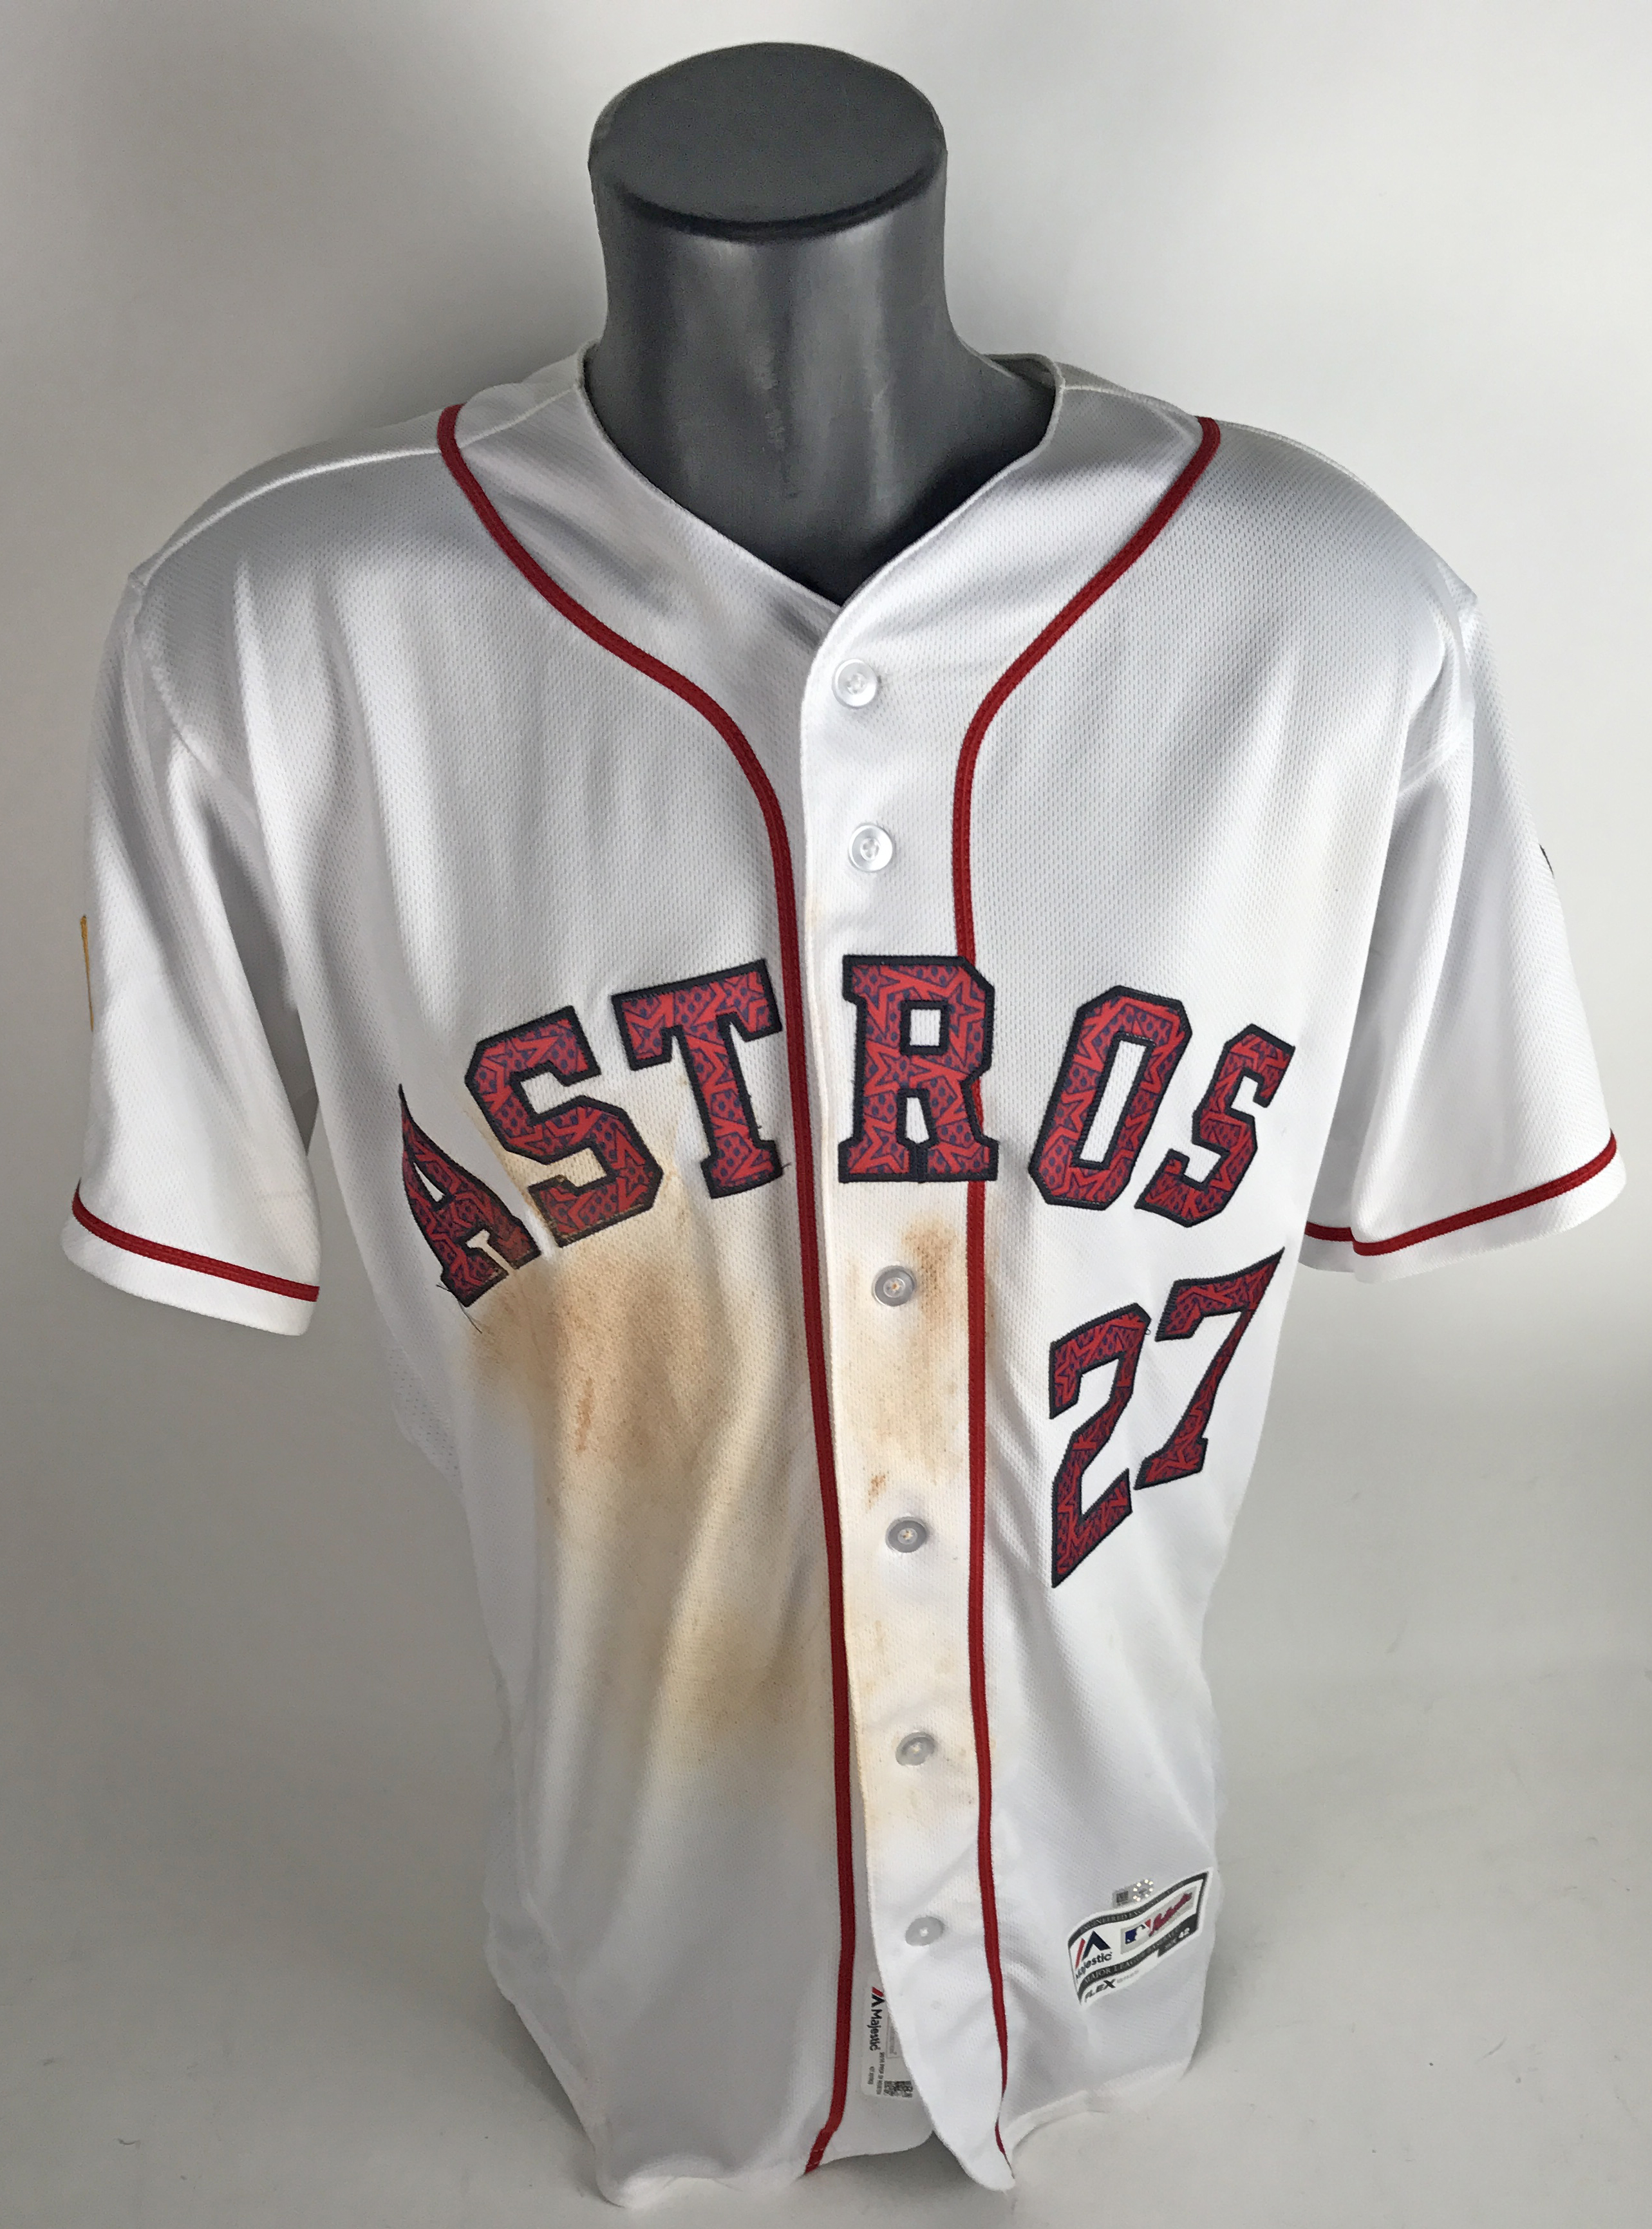 2019 Mexico Series - Game-Used Jersey - Jose Altuve, Houston Astros at Los  Angeles Angels - 5/4/19